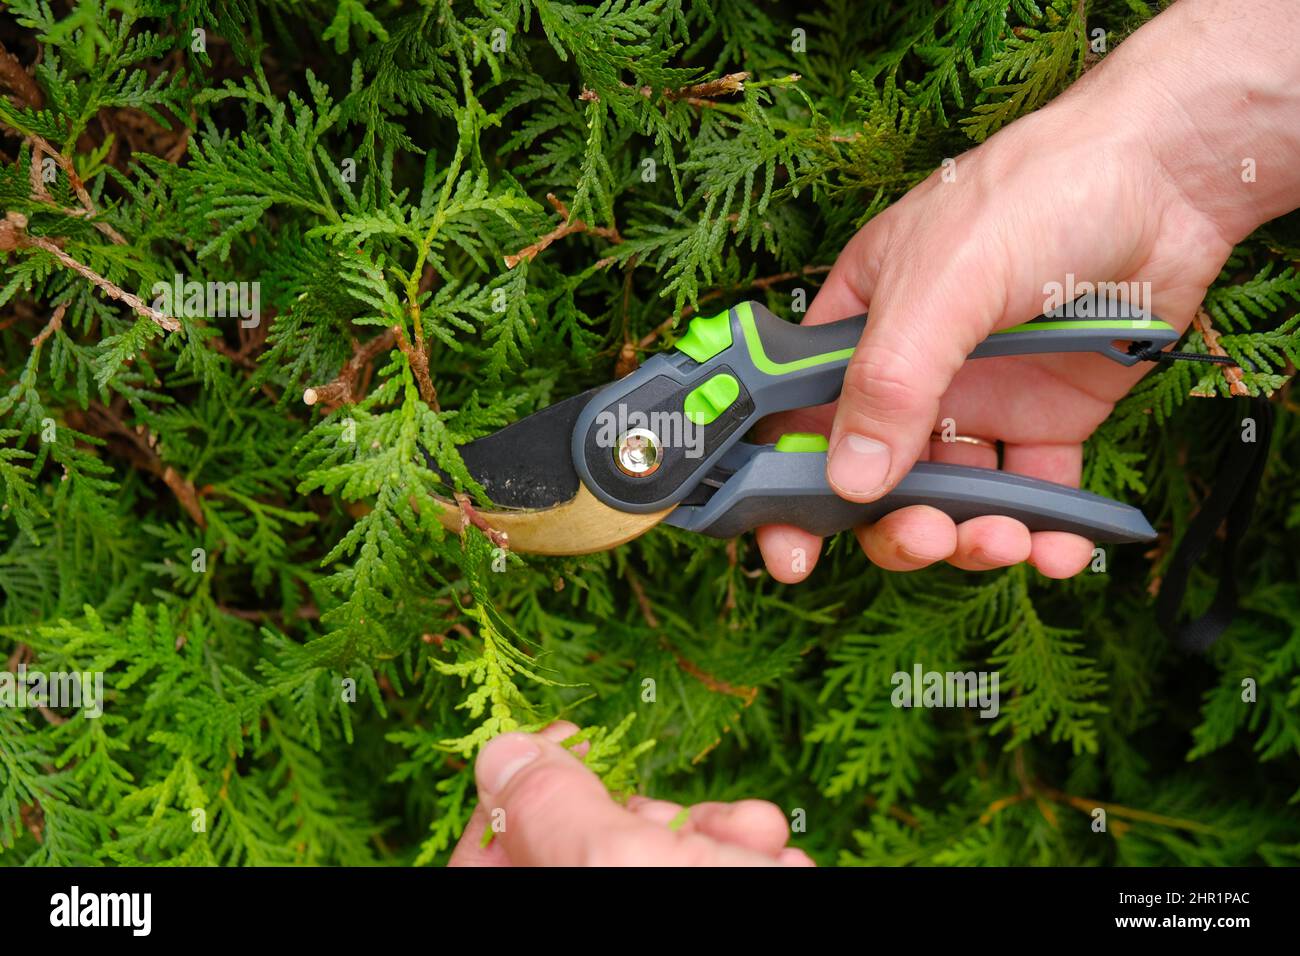 Pruning thuja.Garden Plants Pruning Tool. Garden shears in hands close-up cutting a hedge.Plant pruning. Stock Photo